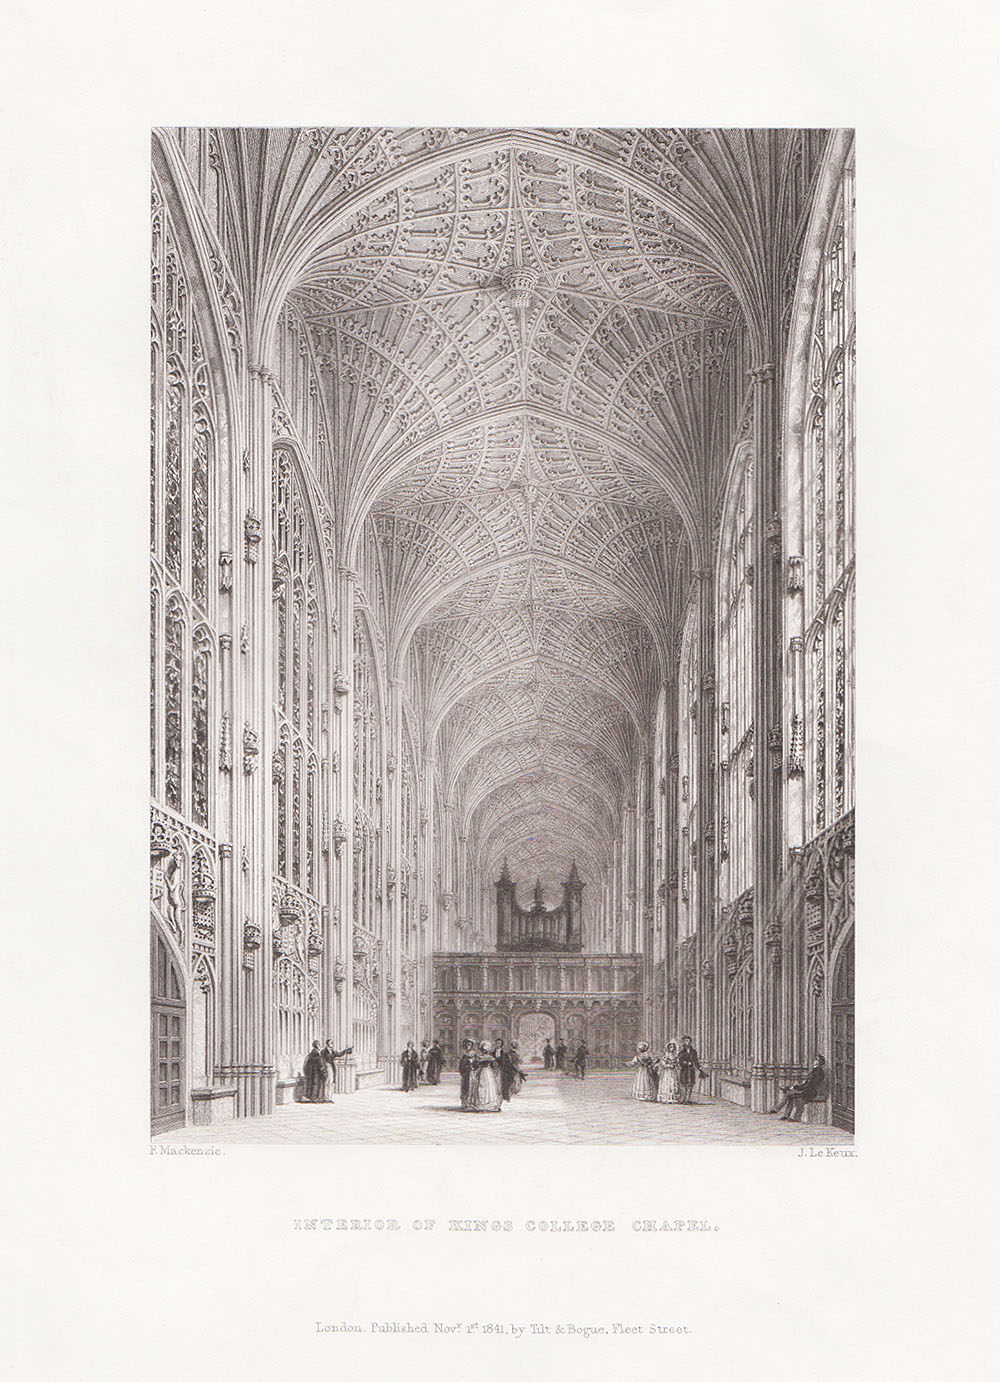 Interior of Kings College Chapel